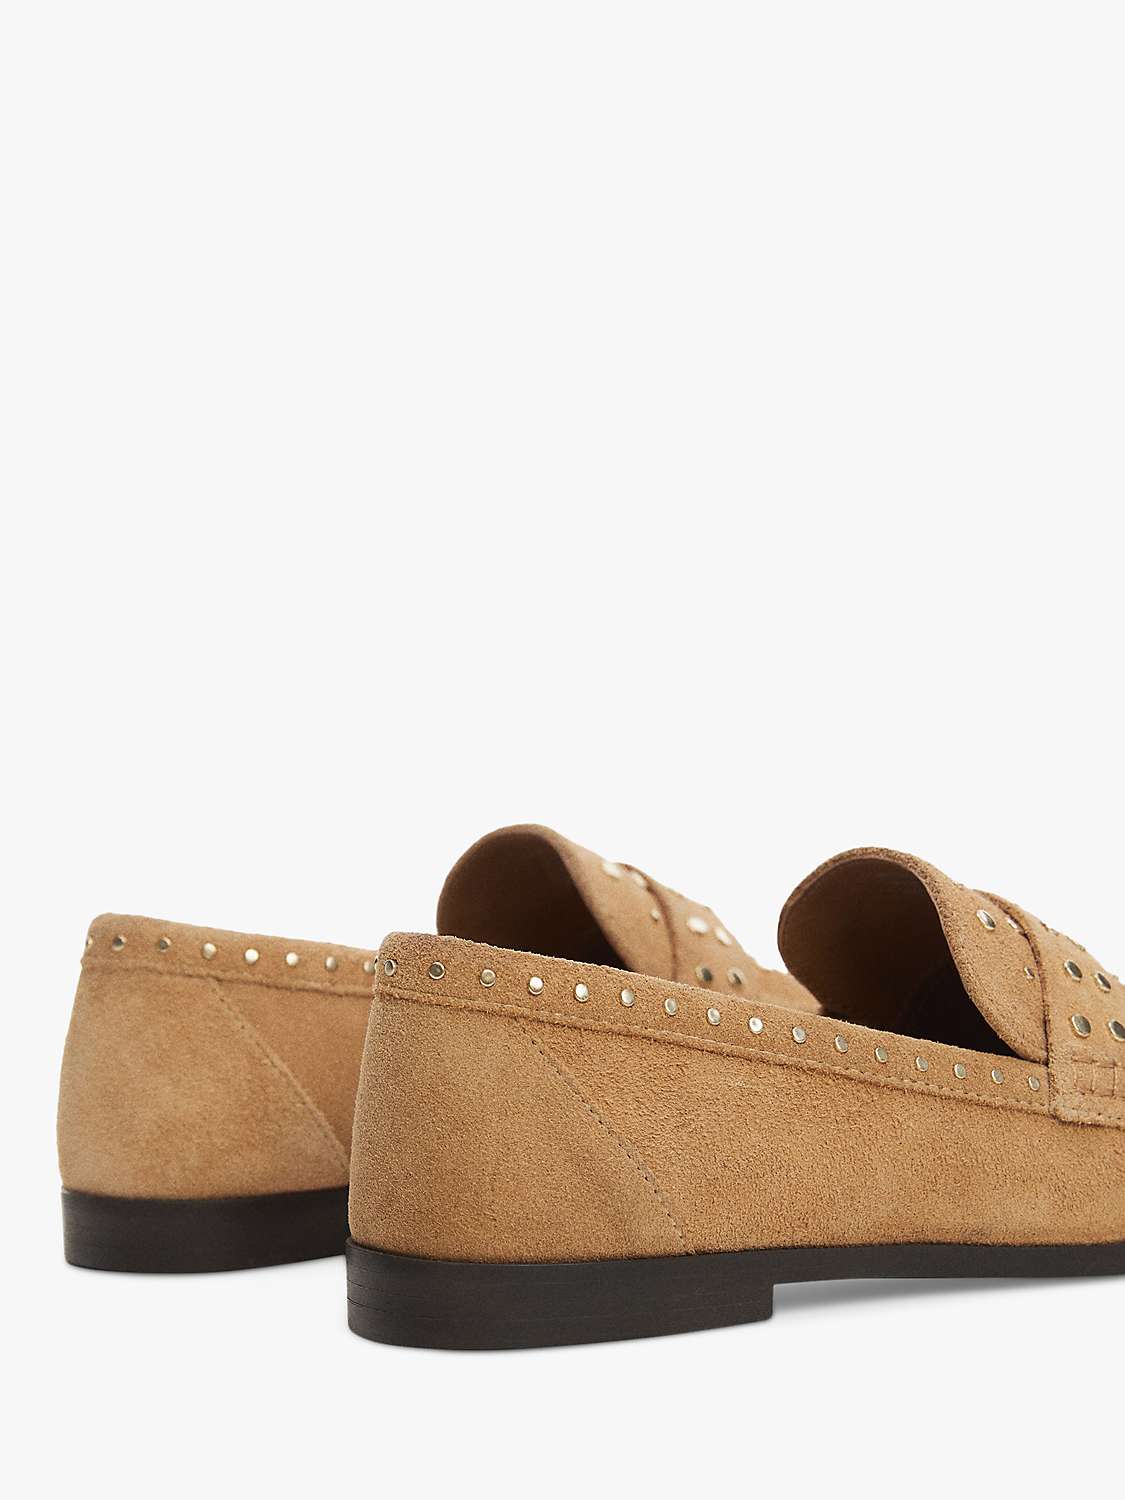 Buy Mango Curro Studded Suede Loafers, Brown Online at johnlewis.com